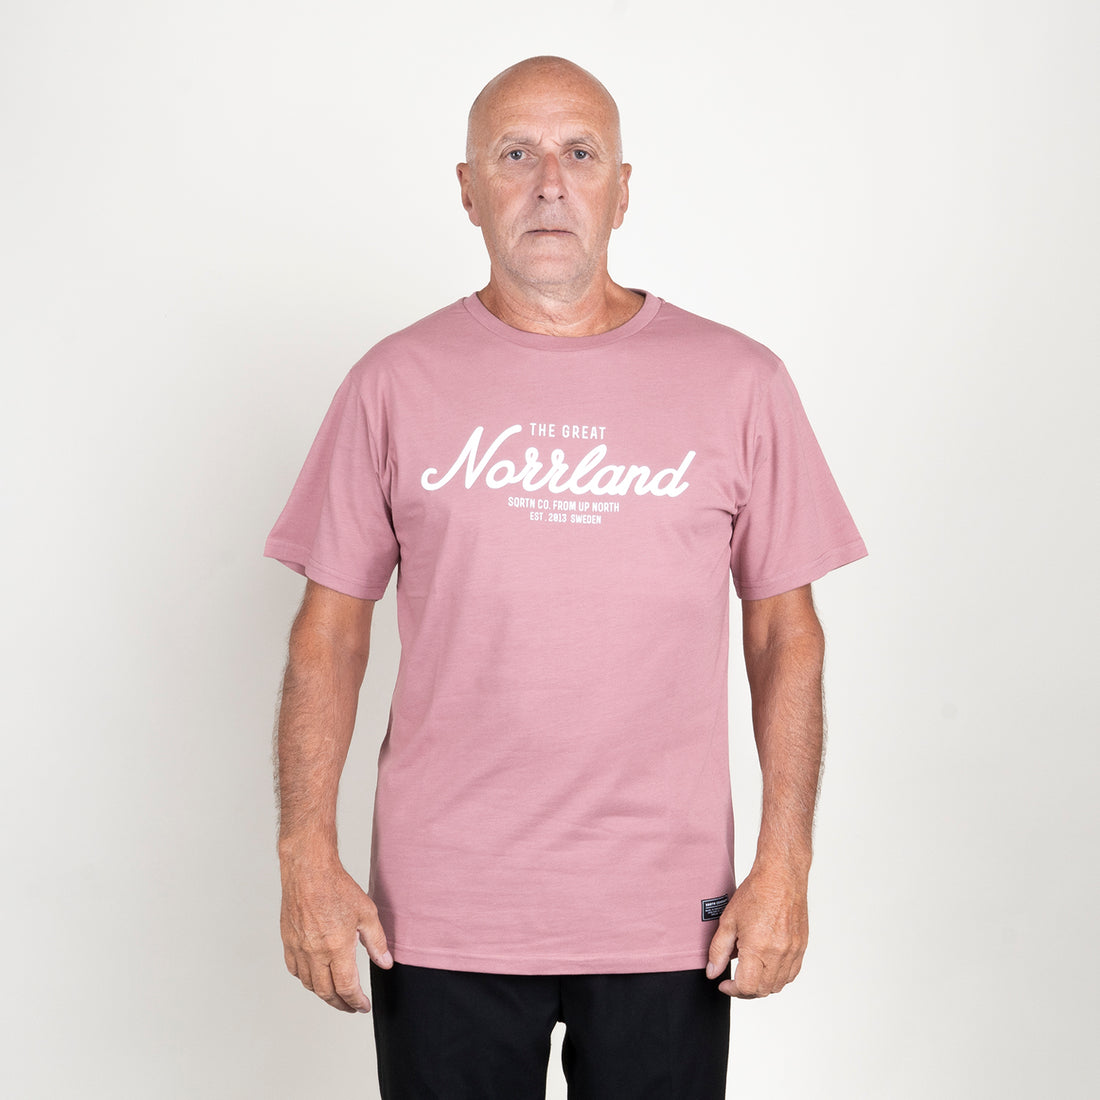 GREAT NORRLAND T-SHIRT - PINK DUST